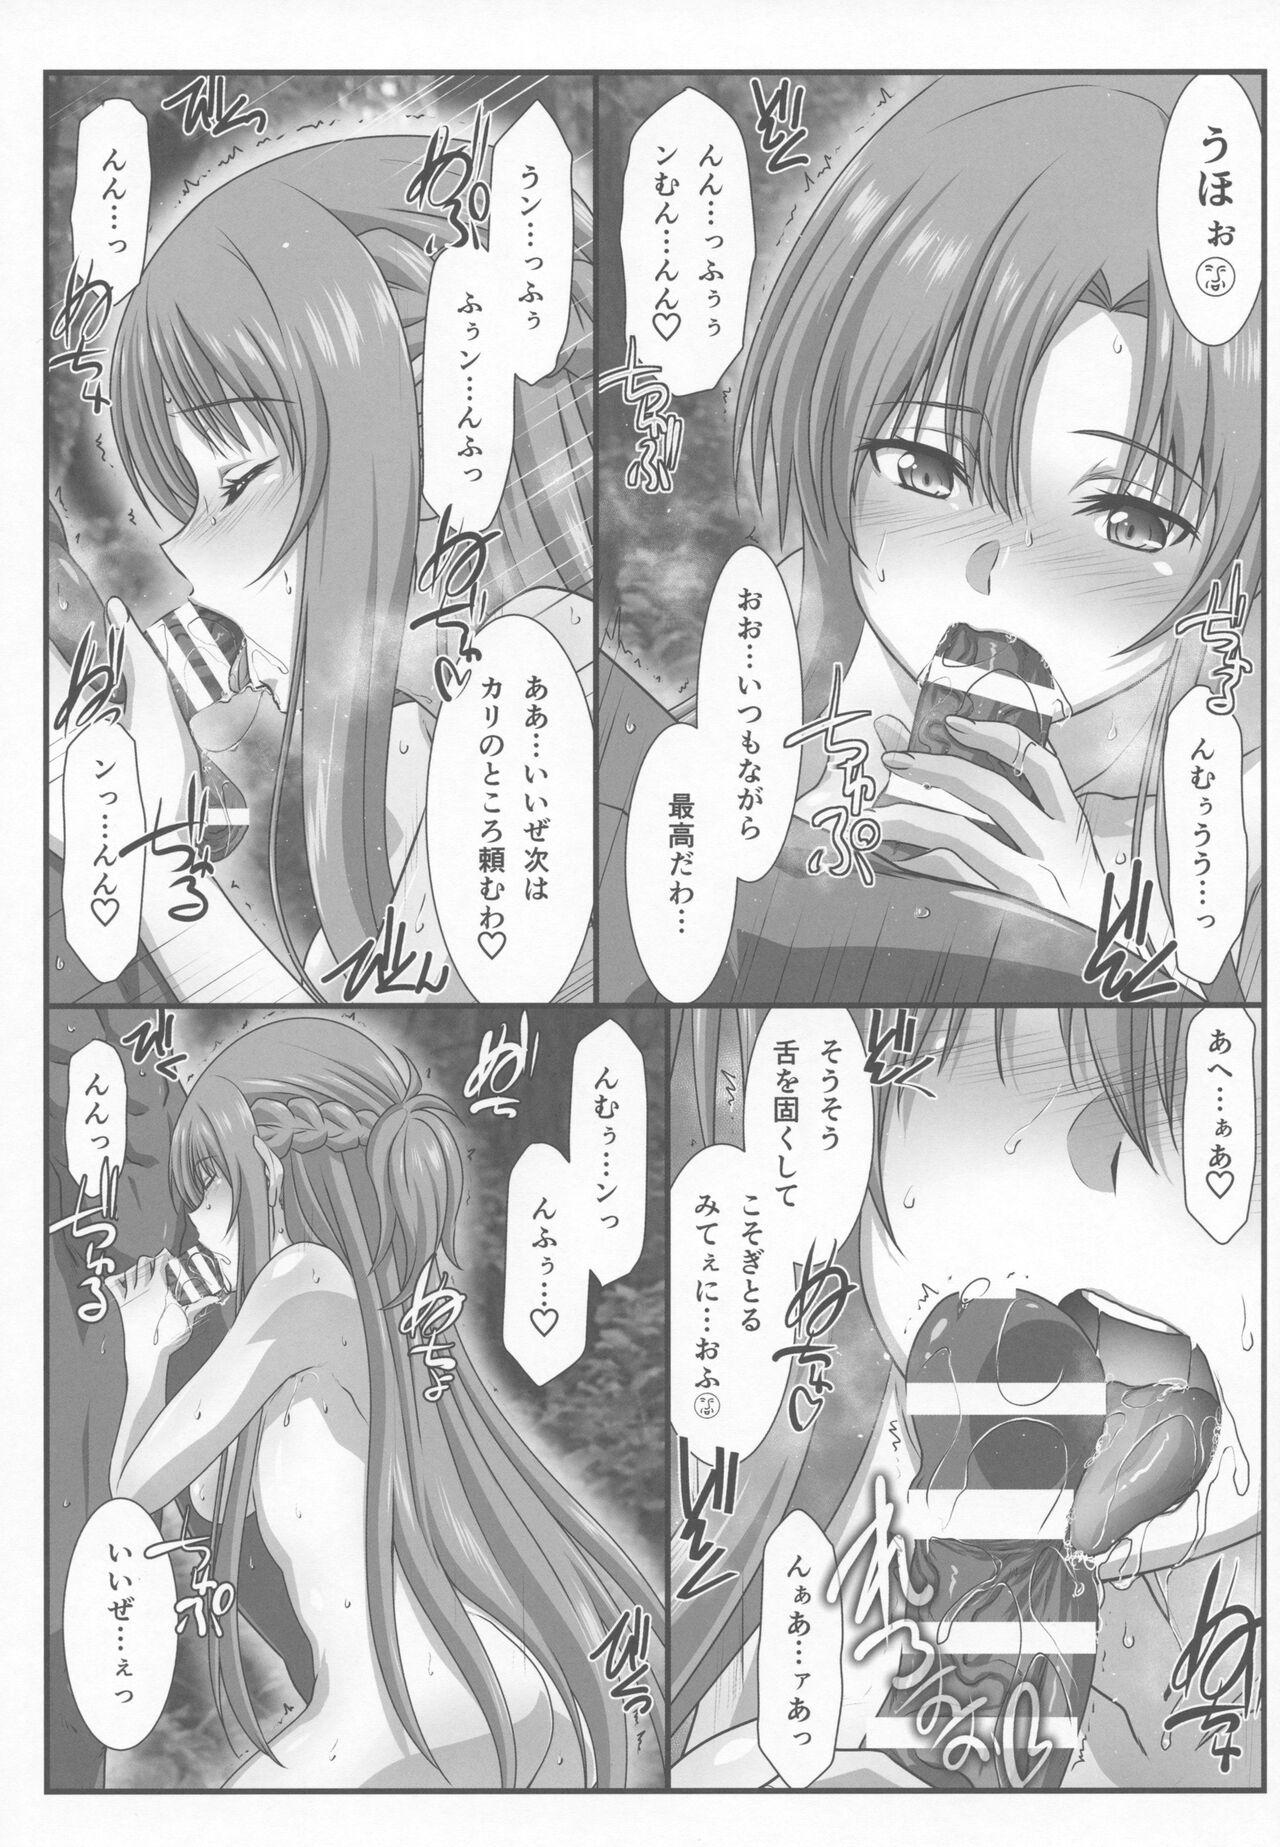 Vadia Astral Bout Ver. 45 - Sword art online Fetiche - Page 6